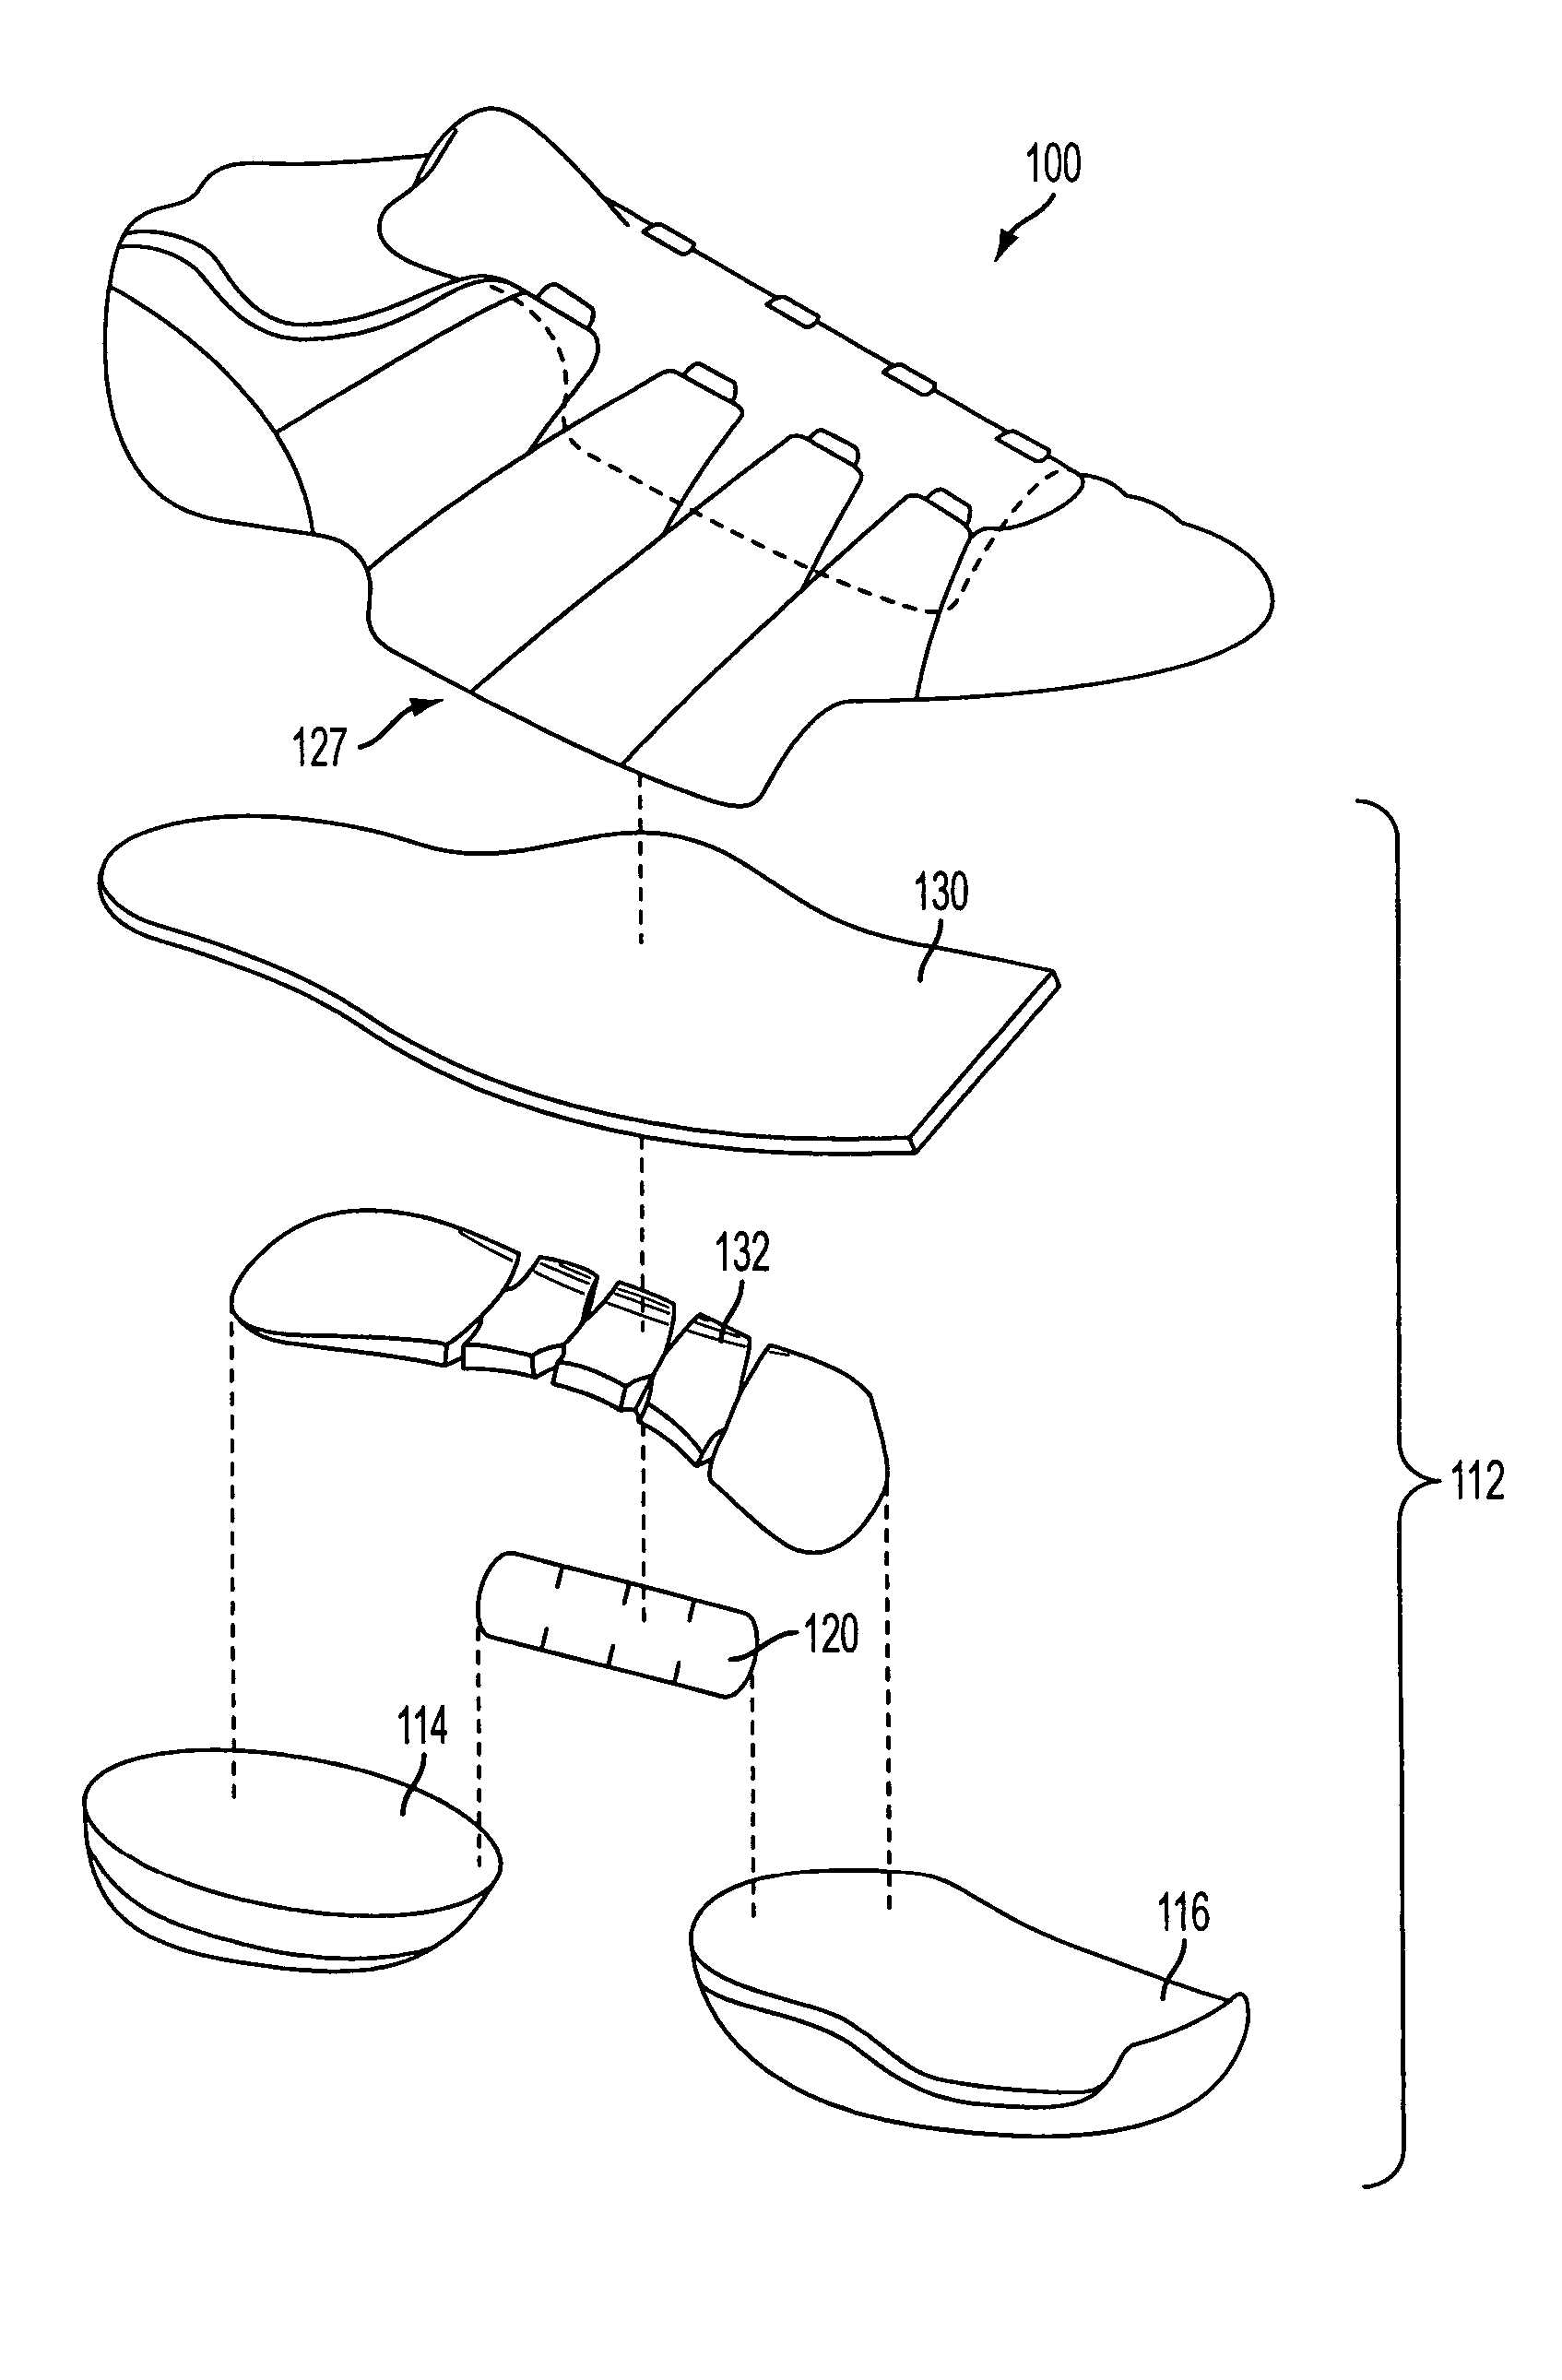 Article of footwear with a flexible arch support